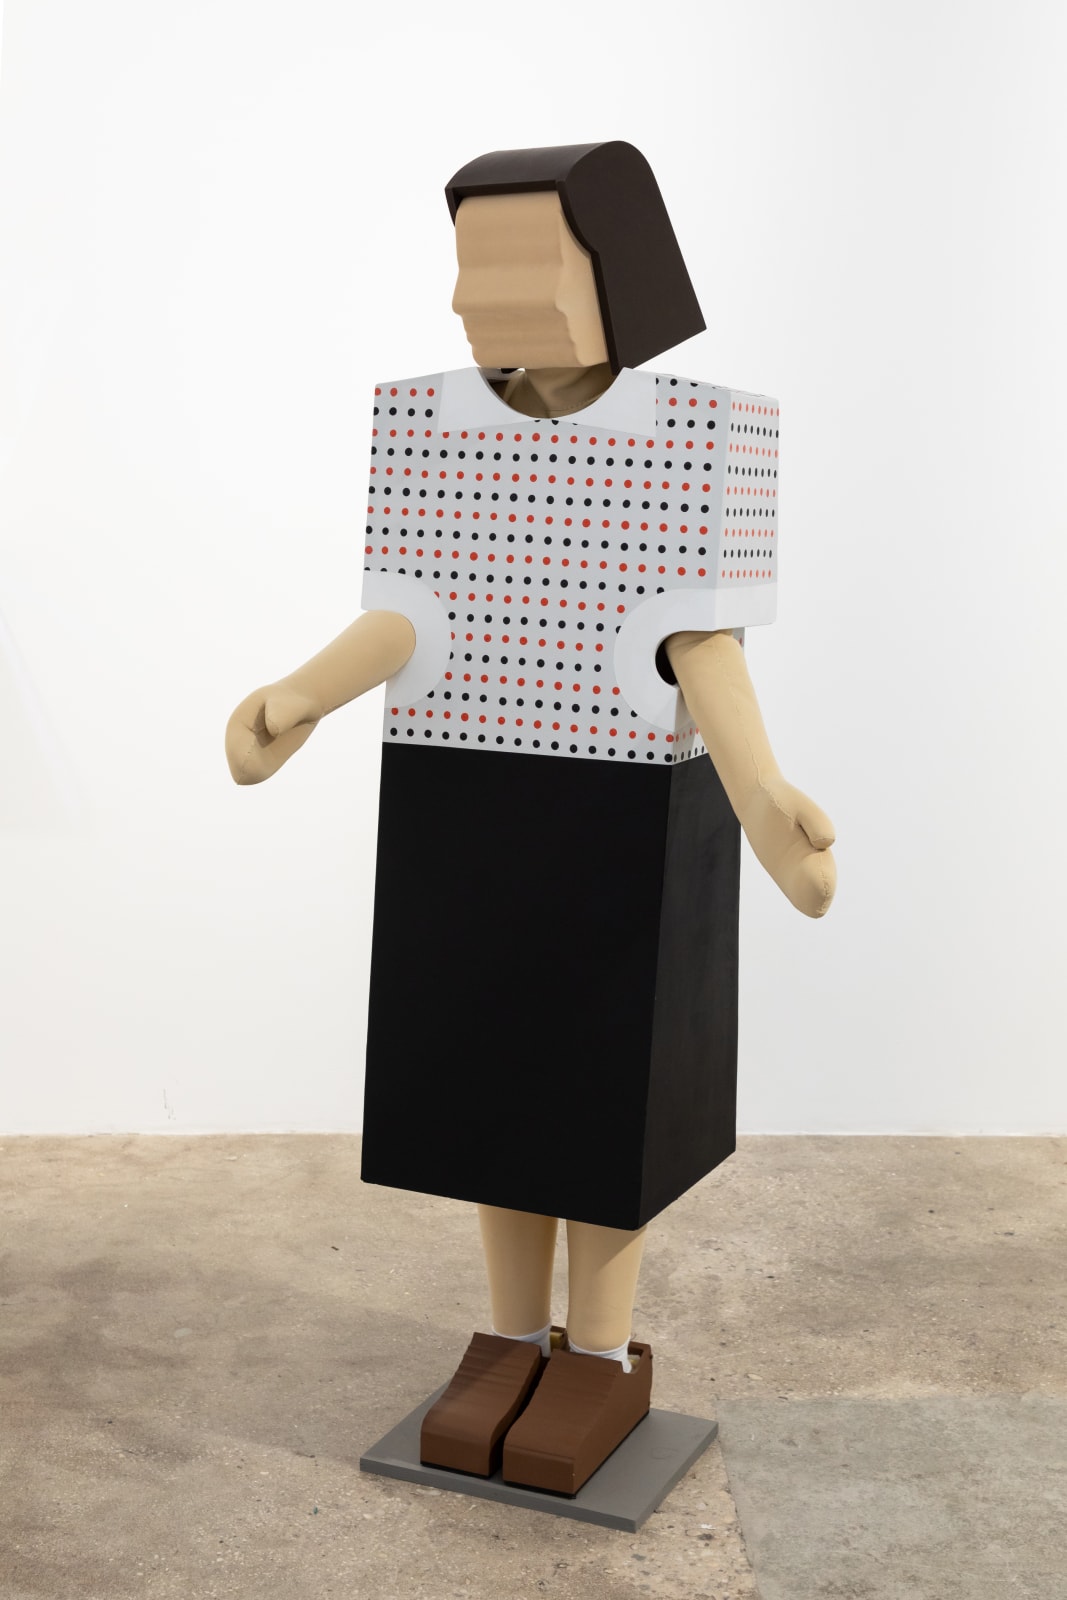 Meredith James, Costume from Mobius City, 2015